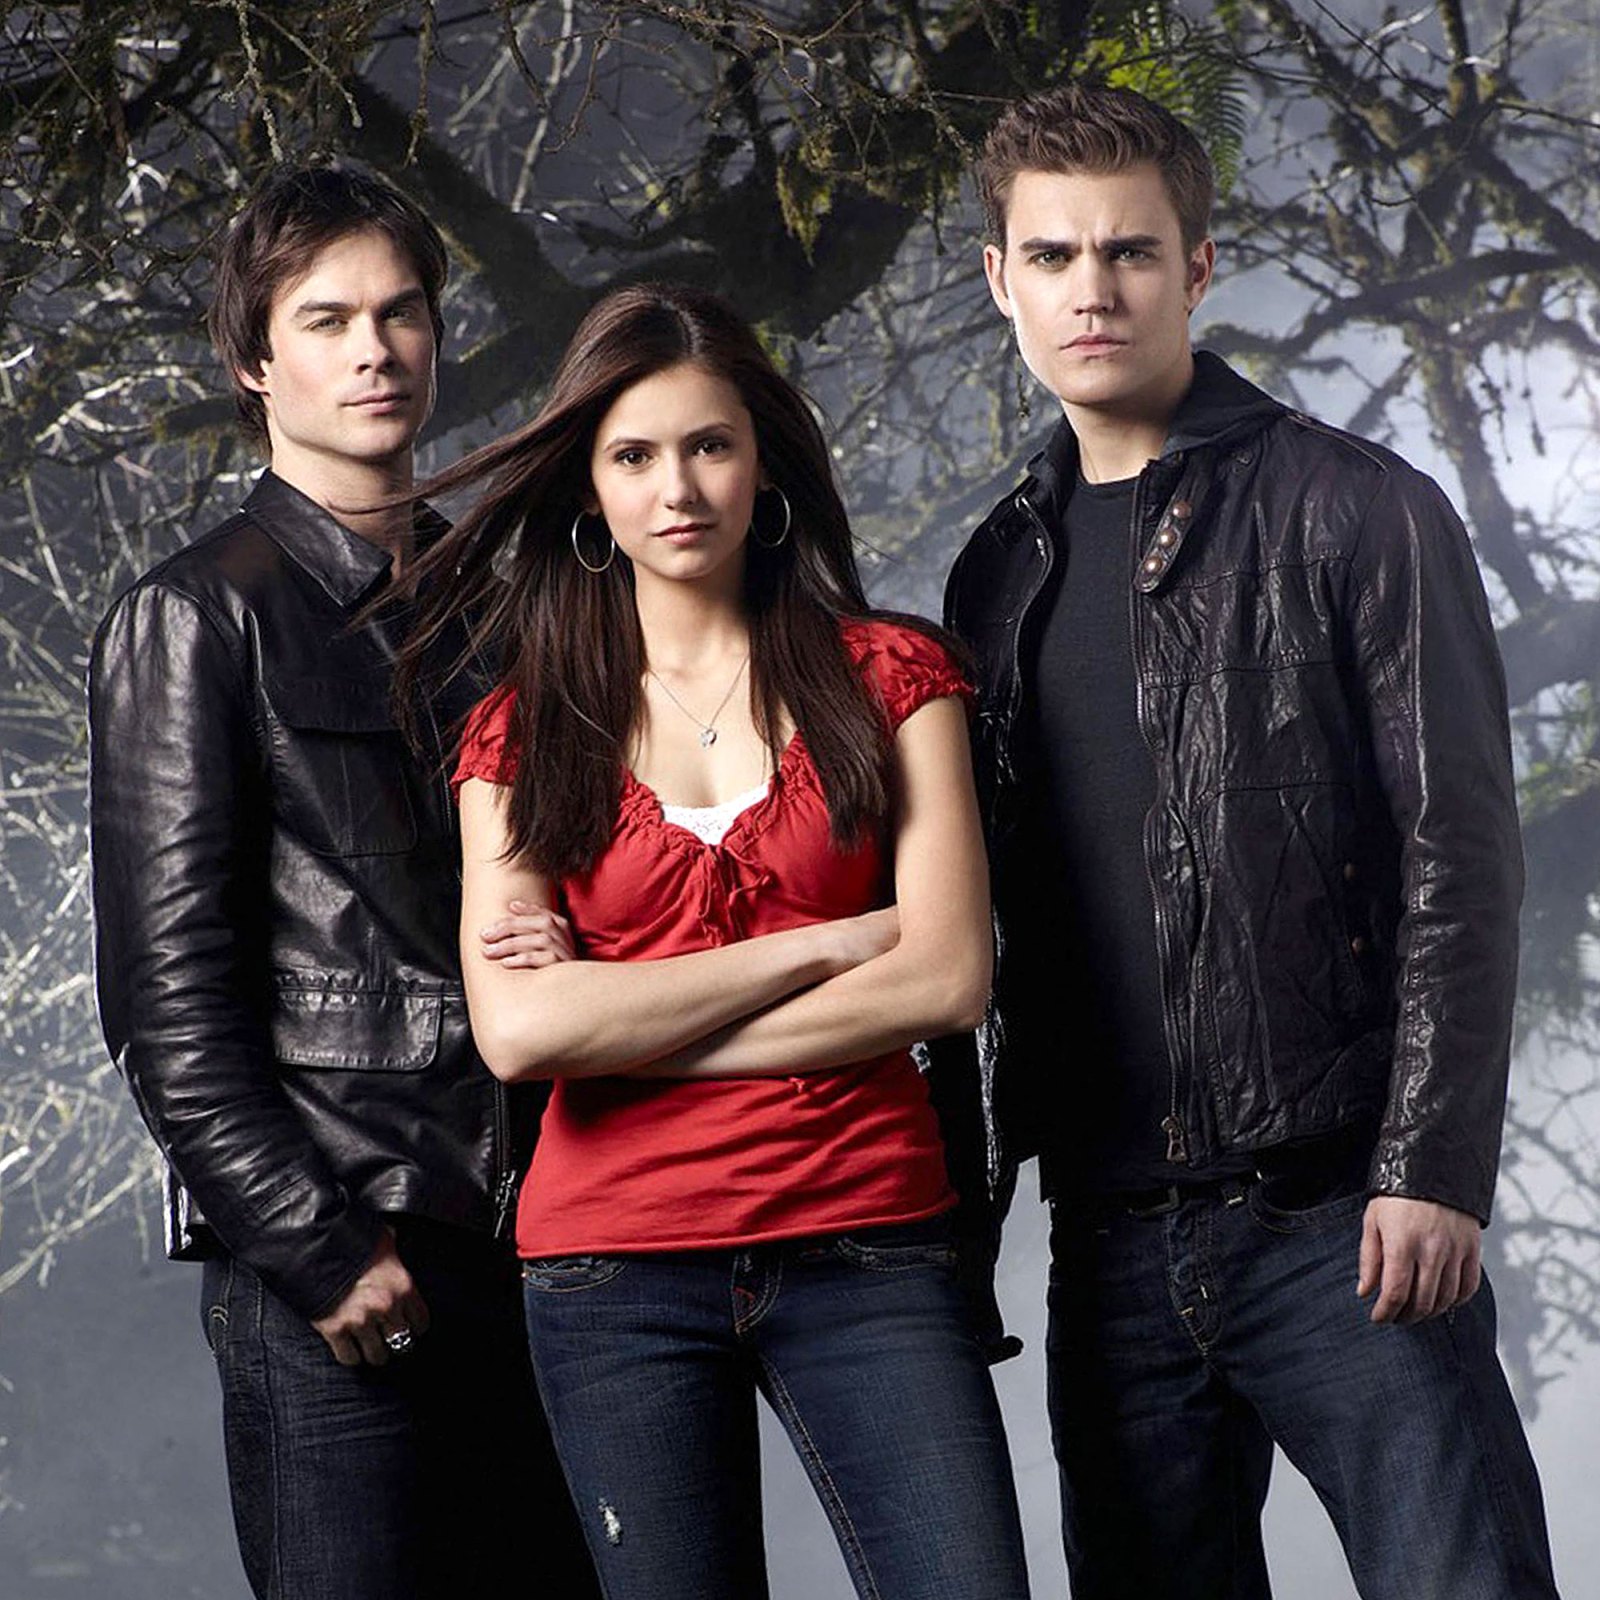 Every Major Vampire Diaries Character Who Died Came Back to Life